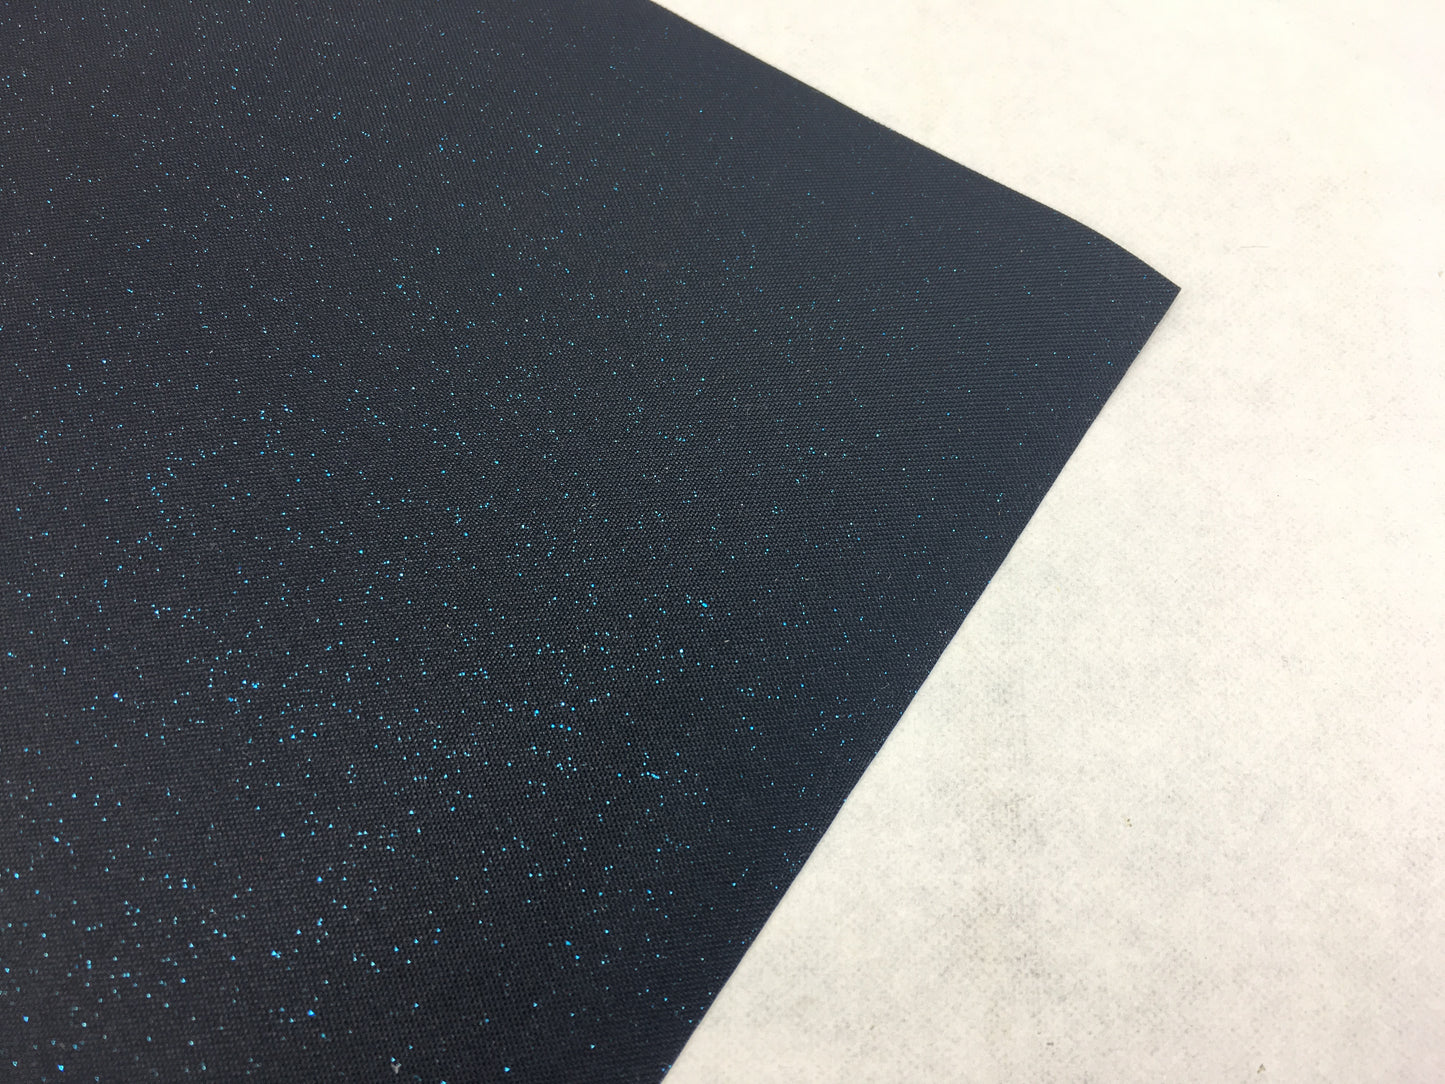 Sparkling Buckram- Durable bookbinding cloth with paper backing